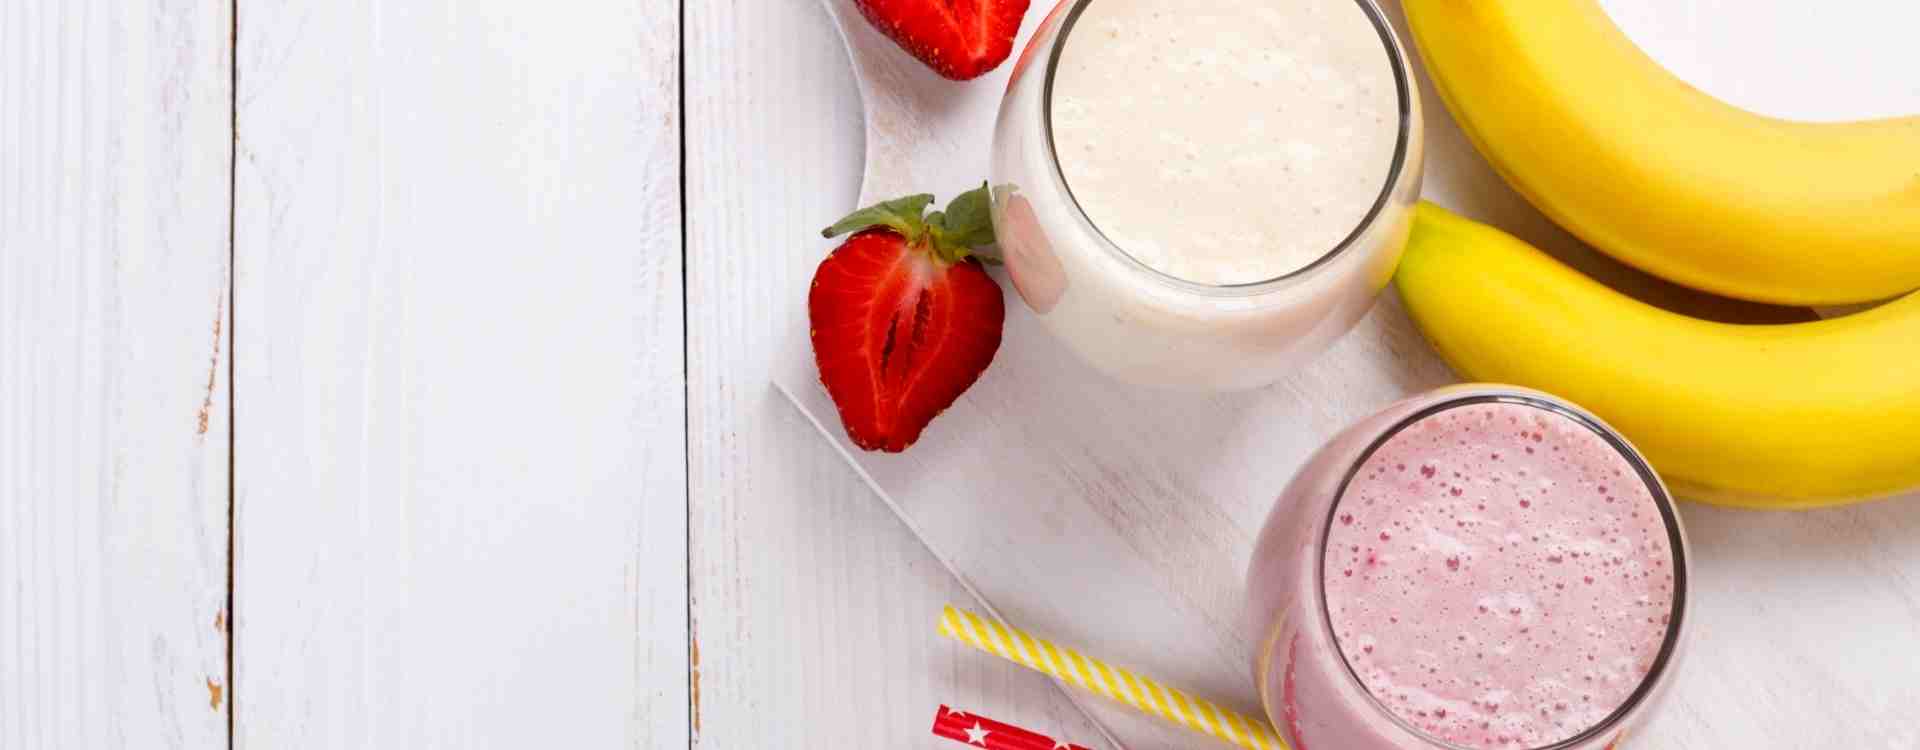 Healthy Vegan Strawberry Banana Smoothie for Two